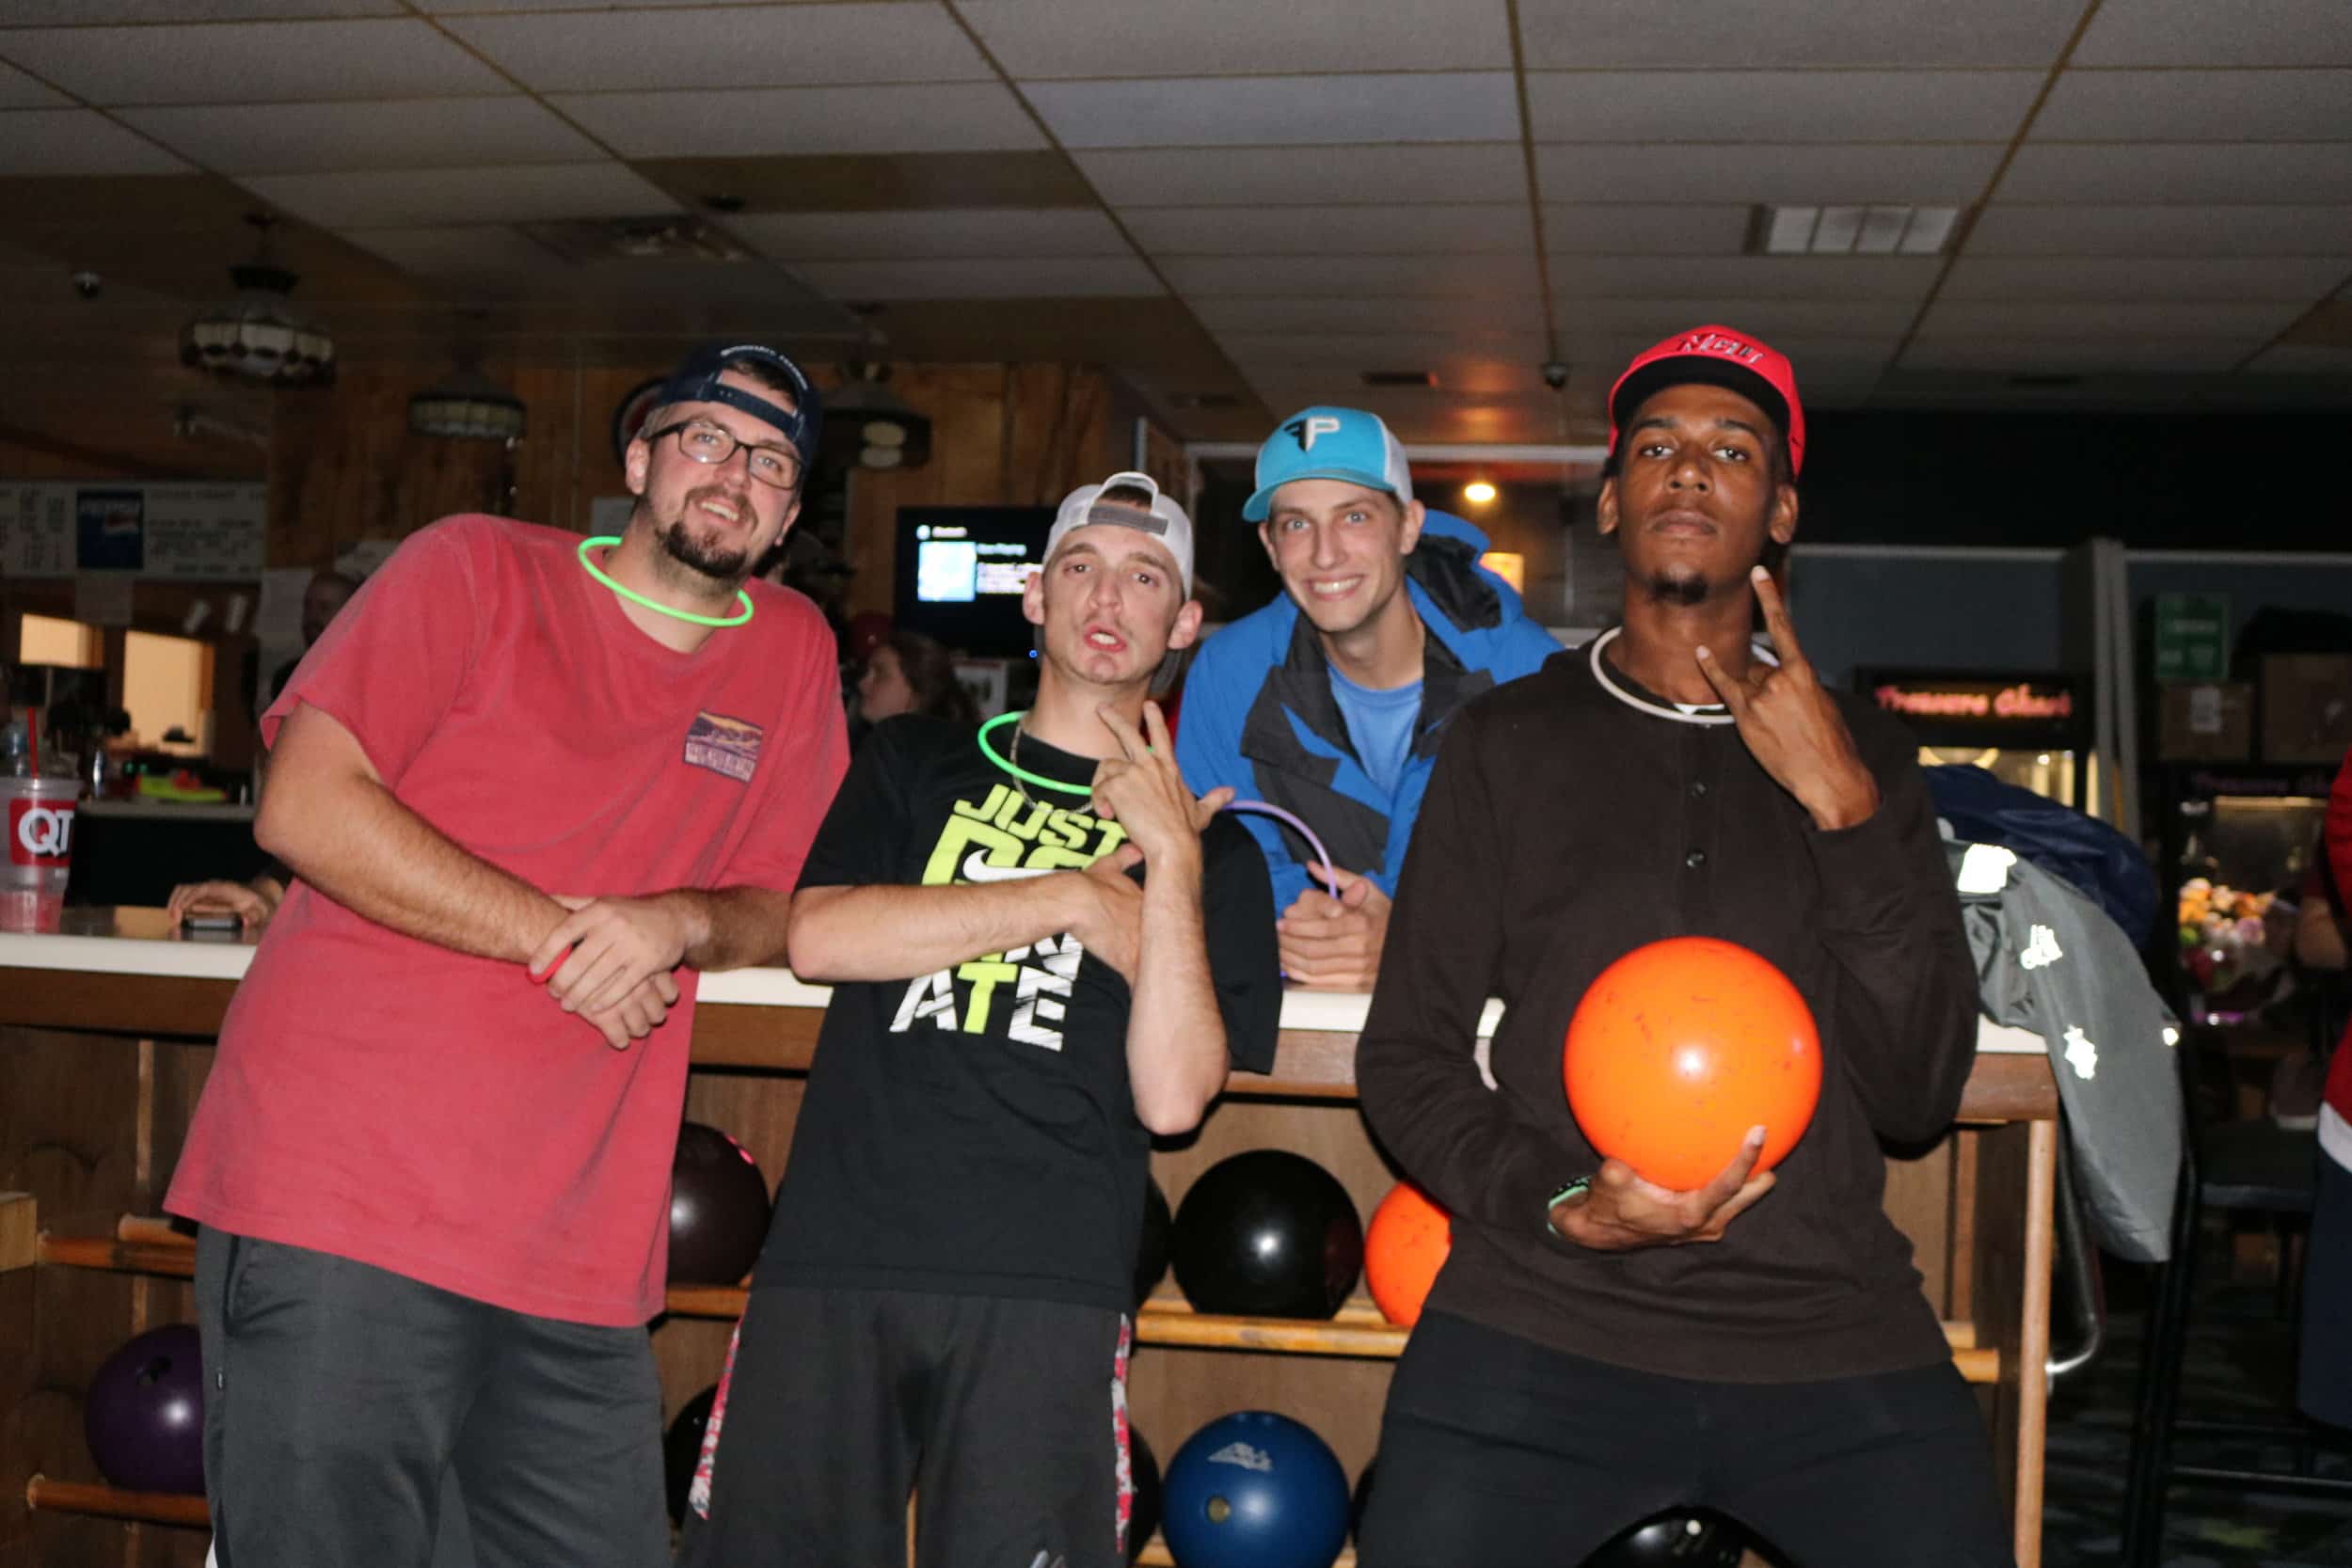 Seniors, Bryce Allen, Josh Bradley and Adam Daniel are all excited to bowl for Sport Management while sophomore, Zion Dendy is ready to compete with SGA on Wednesday night at Peach Bowl Lanes for free.